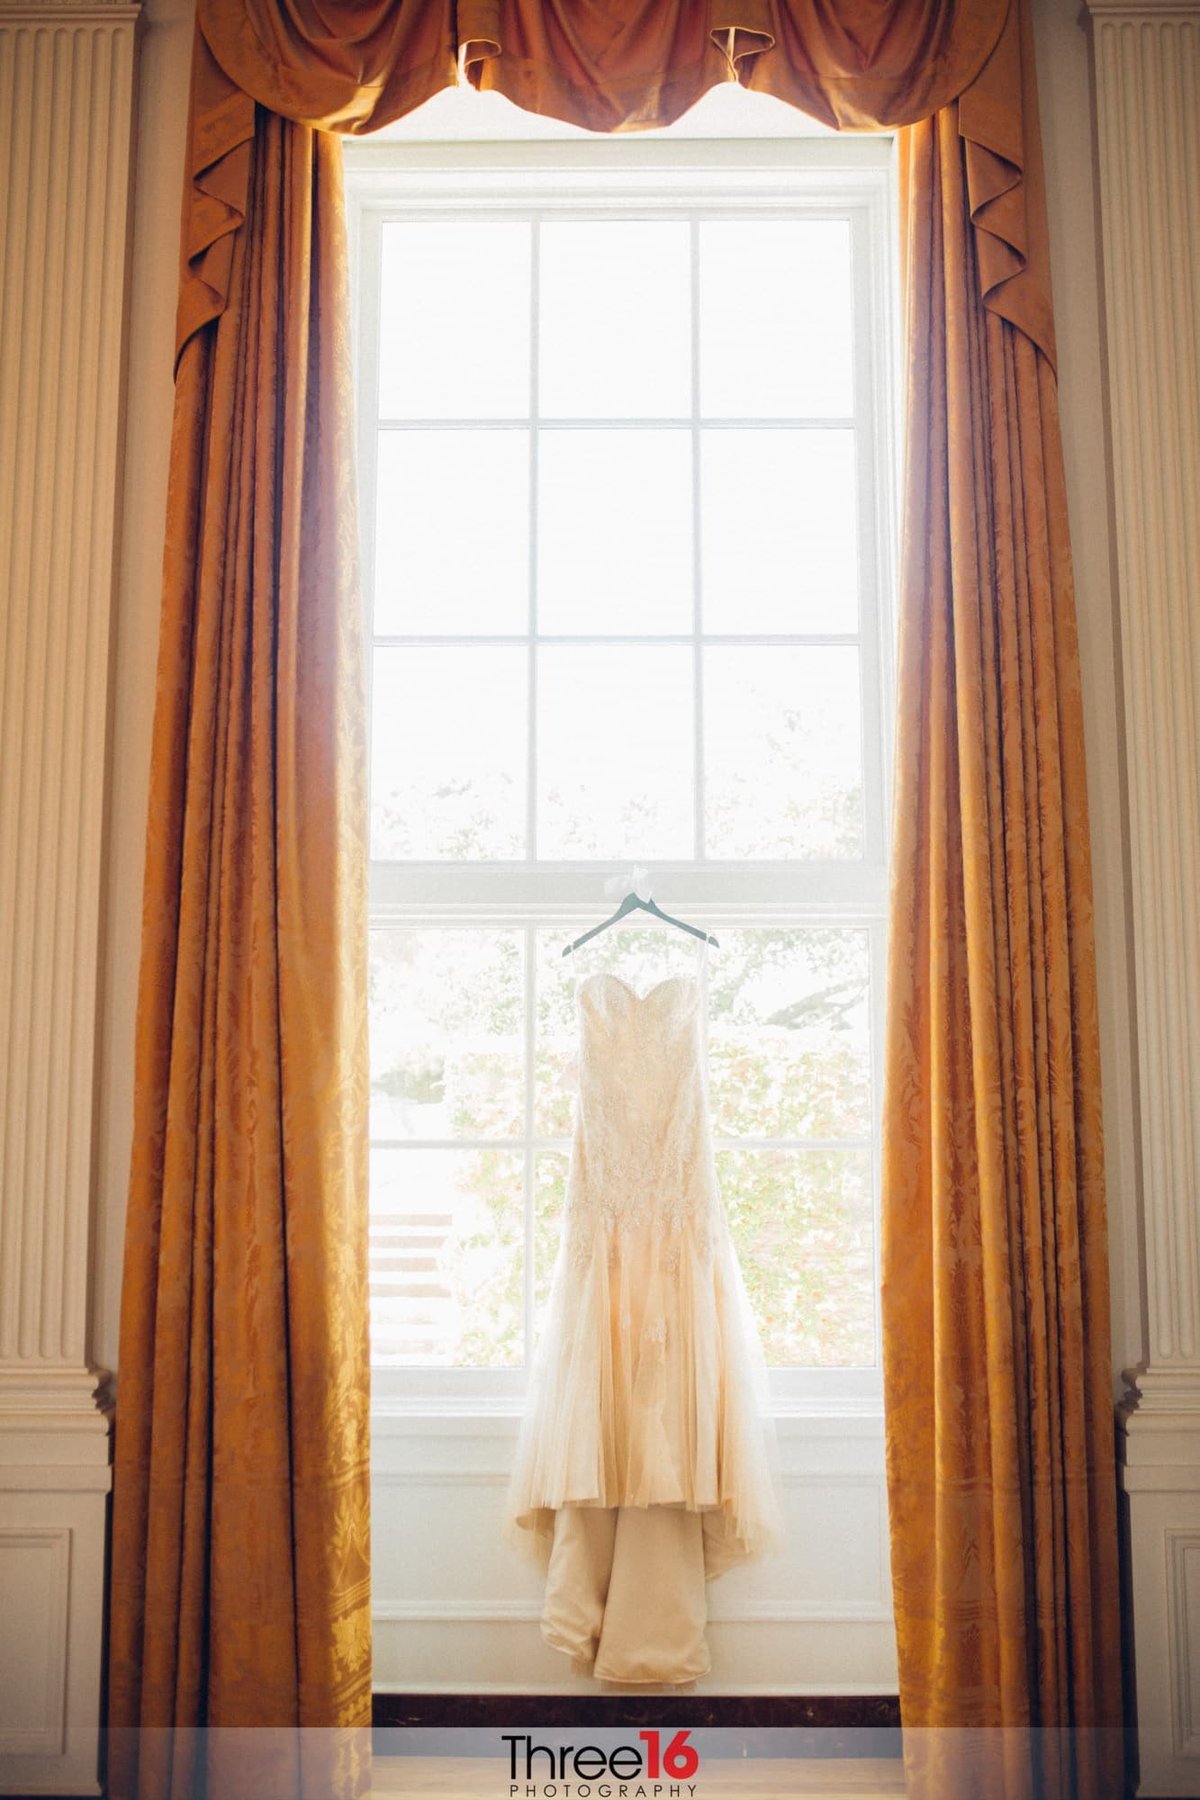 Bride's dress hangs on display in front of a large window